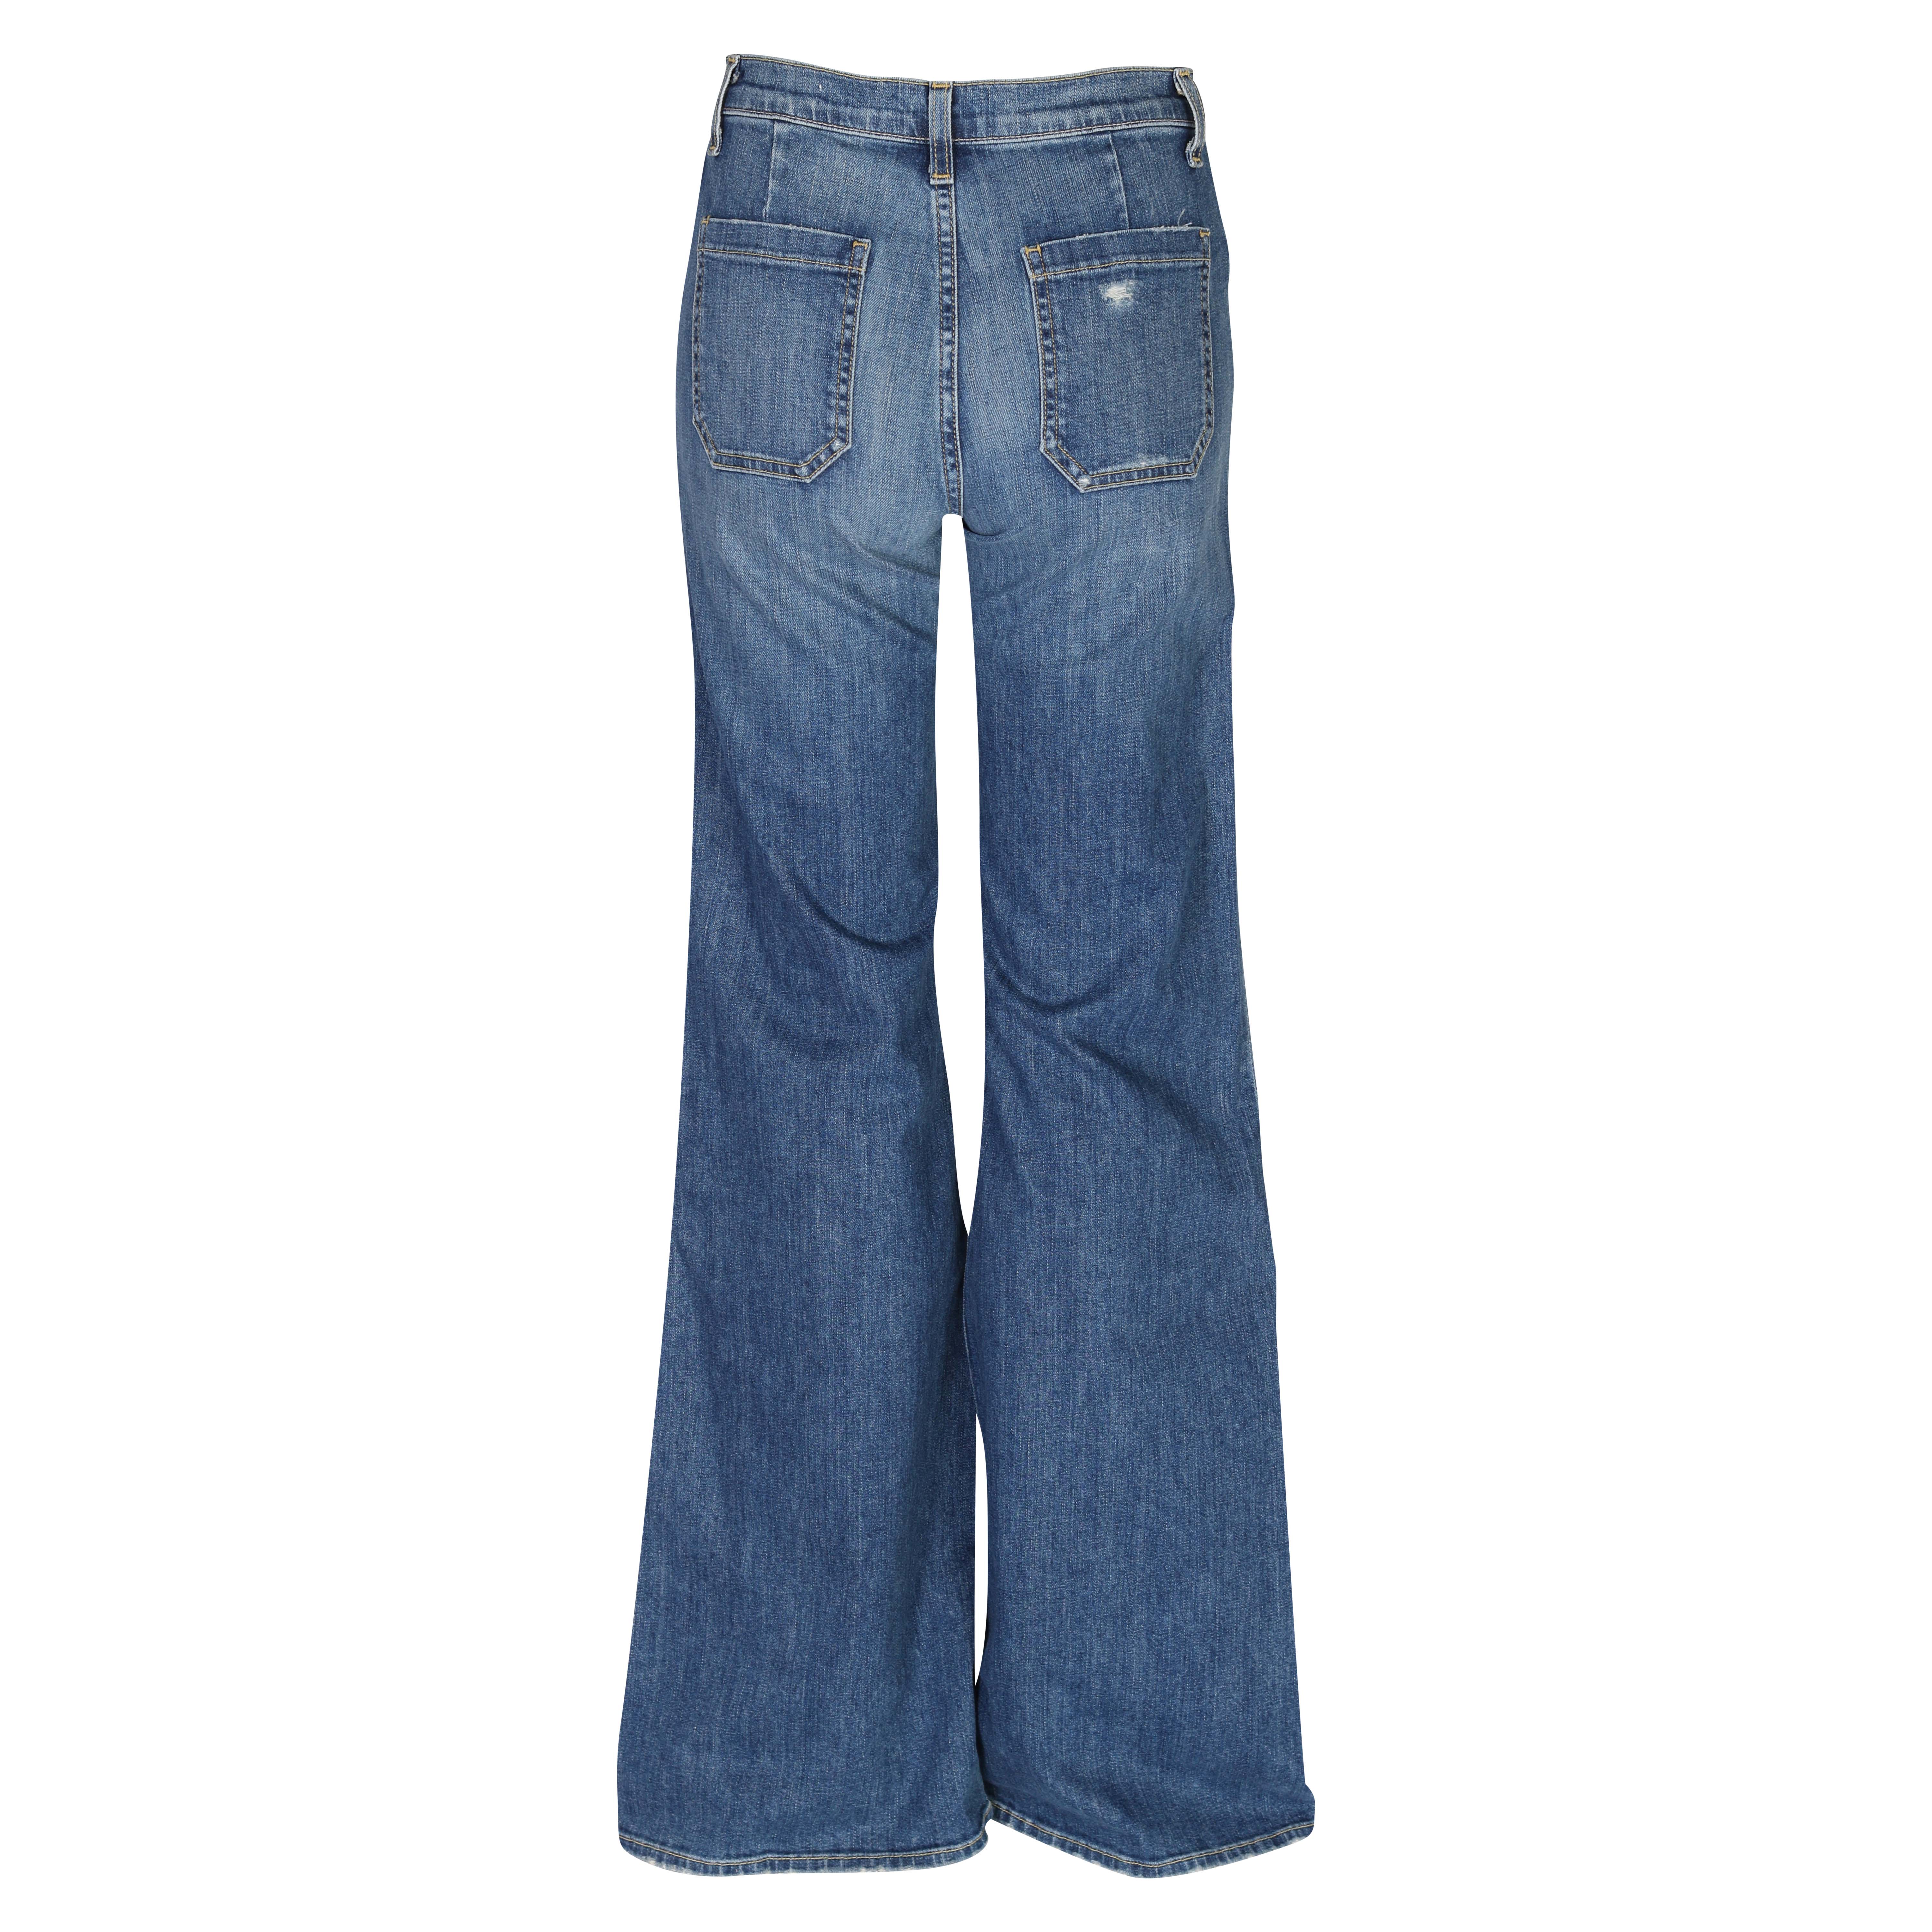 Nili Lotan Florence Jeans in Classic Washed 25